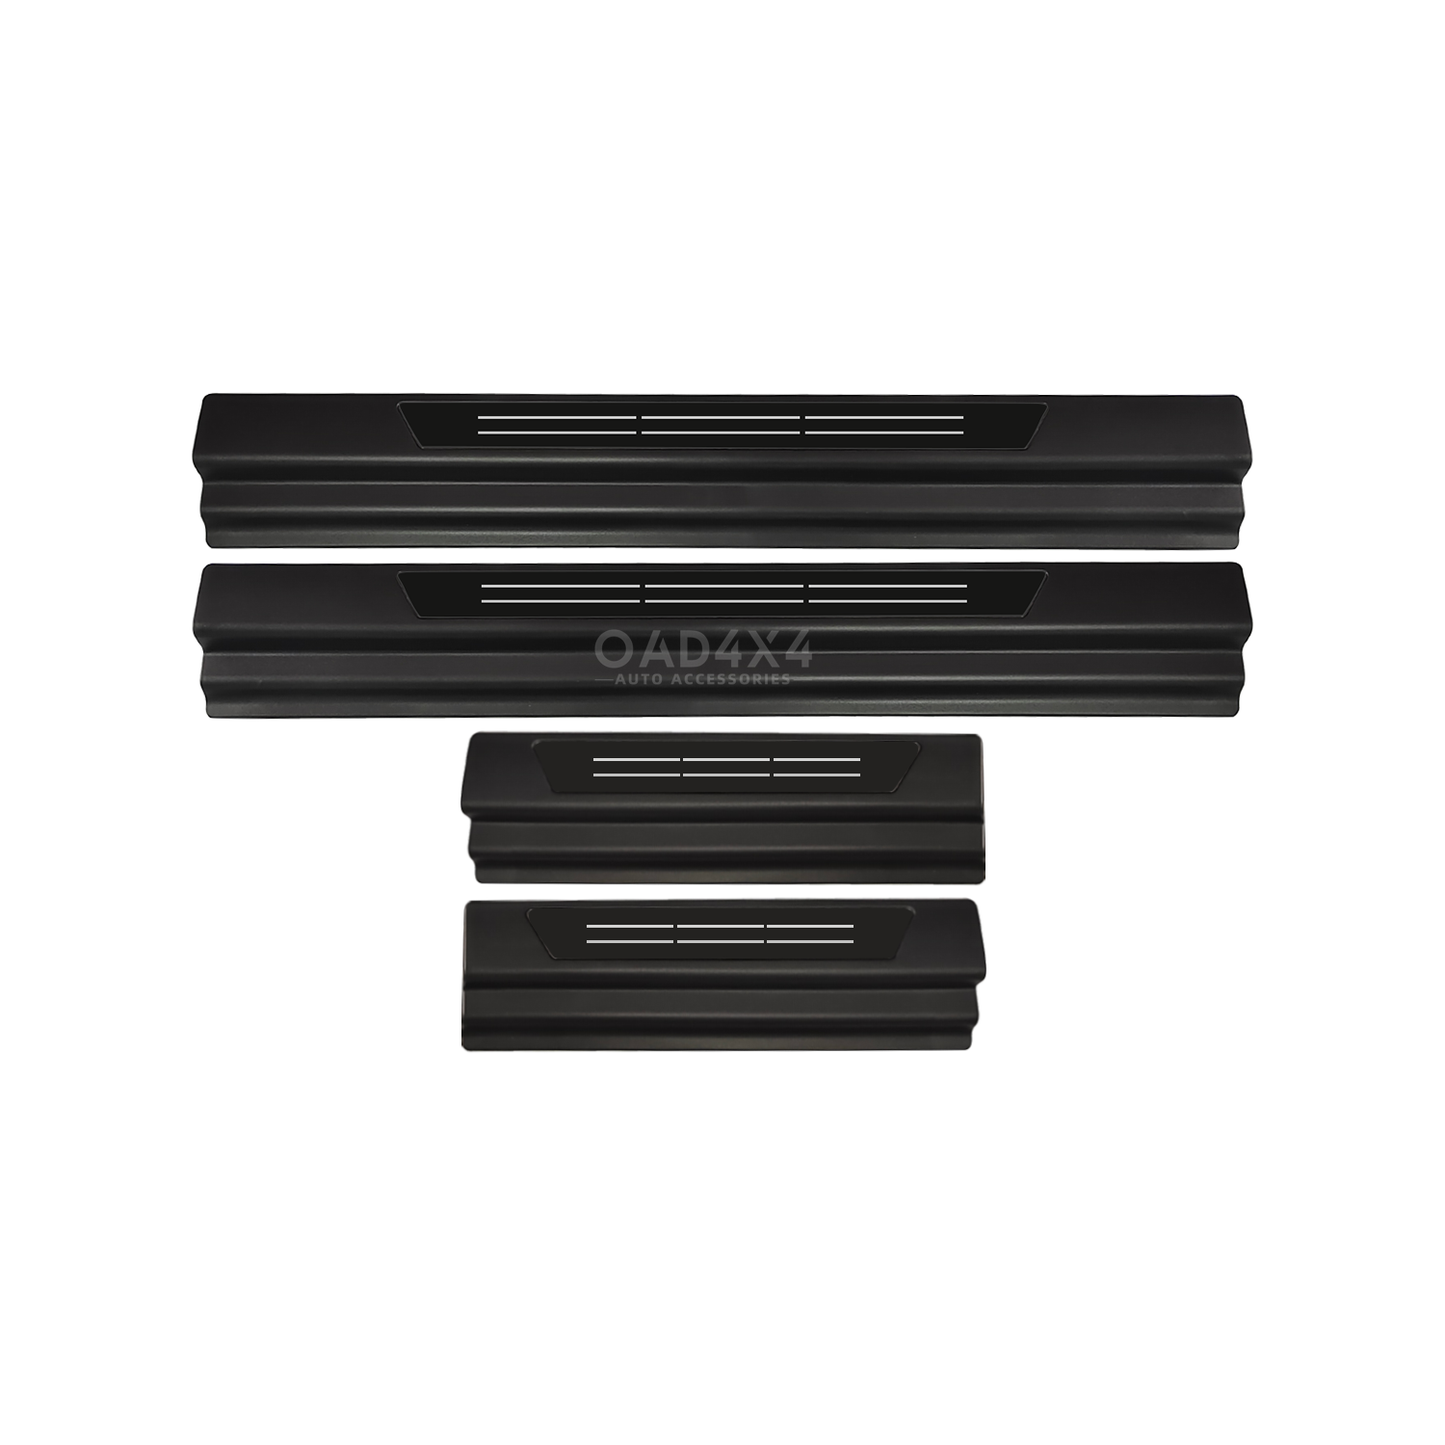 Black Door Sill Protector for Nissan Navara NP300 Dual Cab Stainless Steel Scuff Plates Door Sills Protector